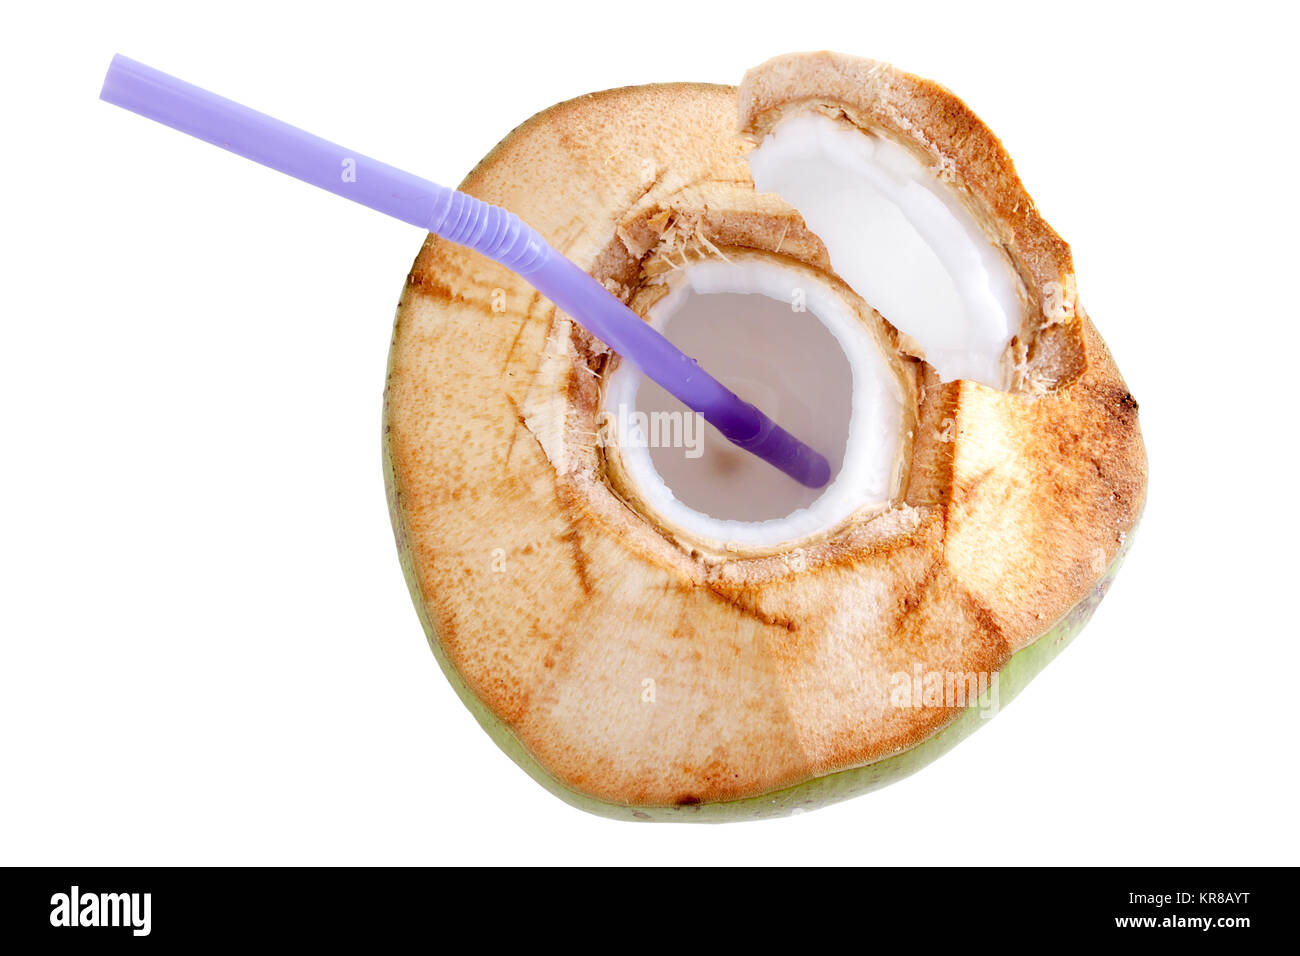 Coconut water drink. Stock Photo